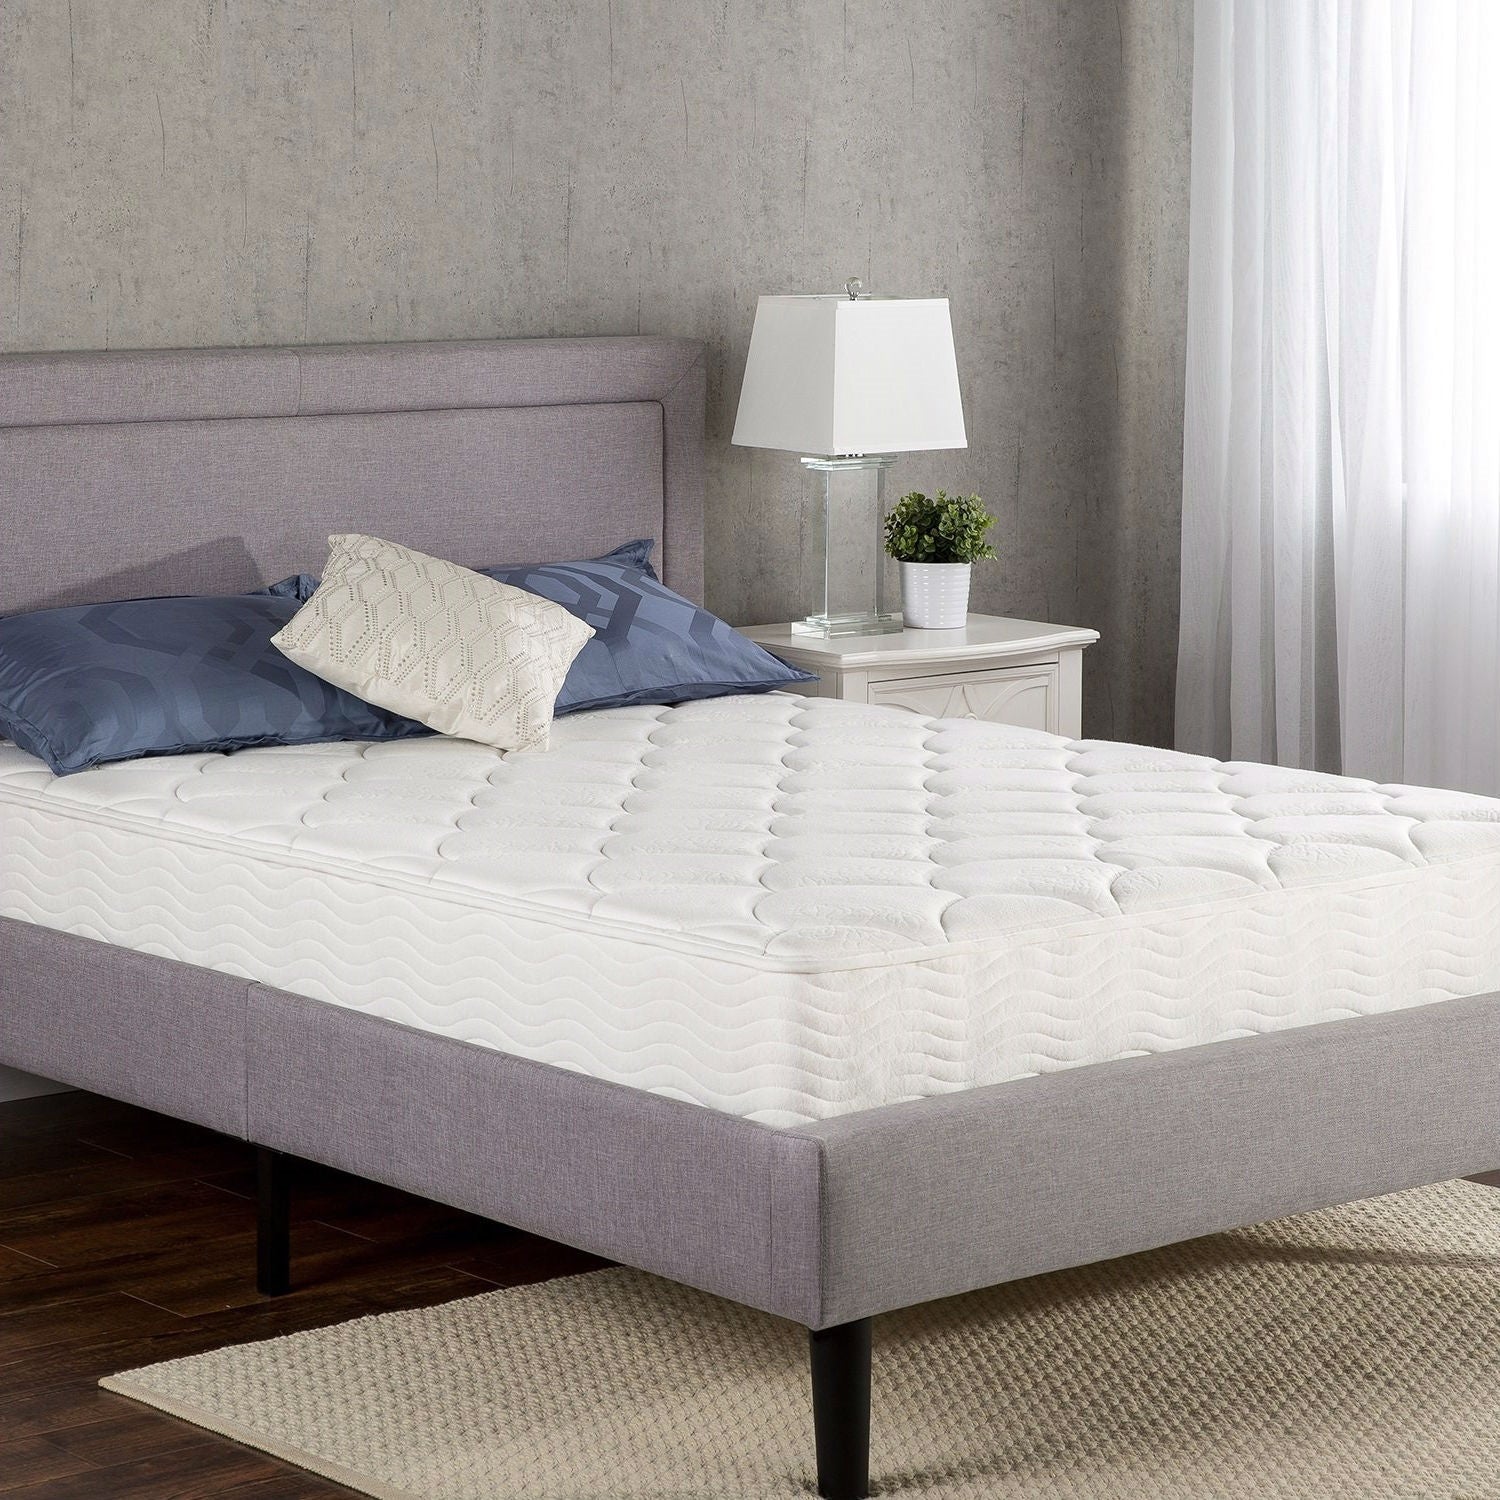 Queen size 8-inch Pocketed Spring Mattress